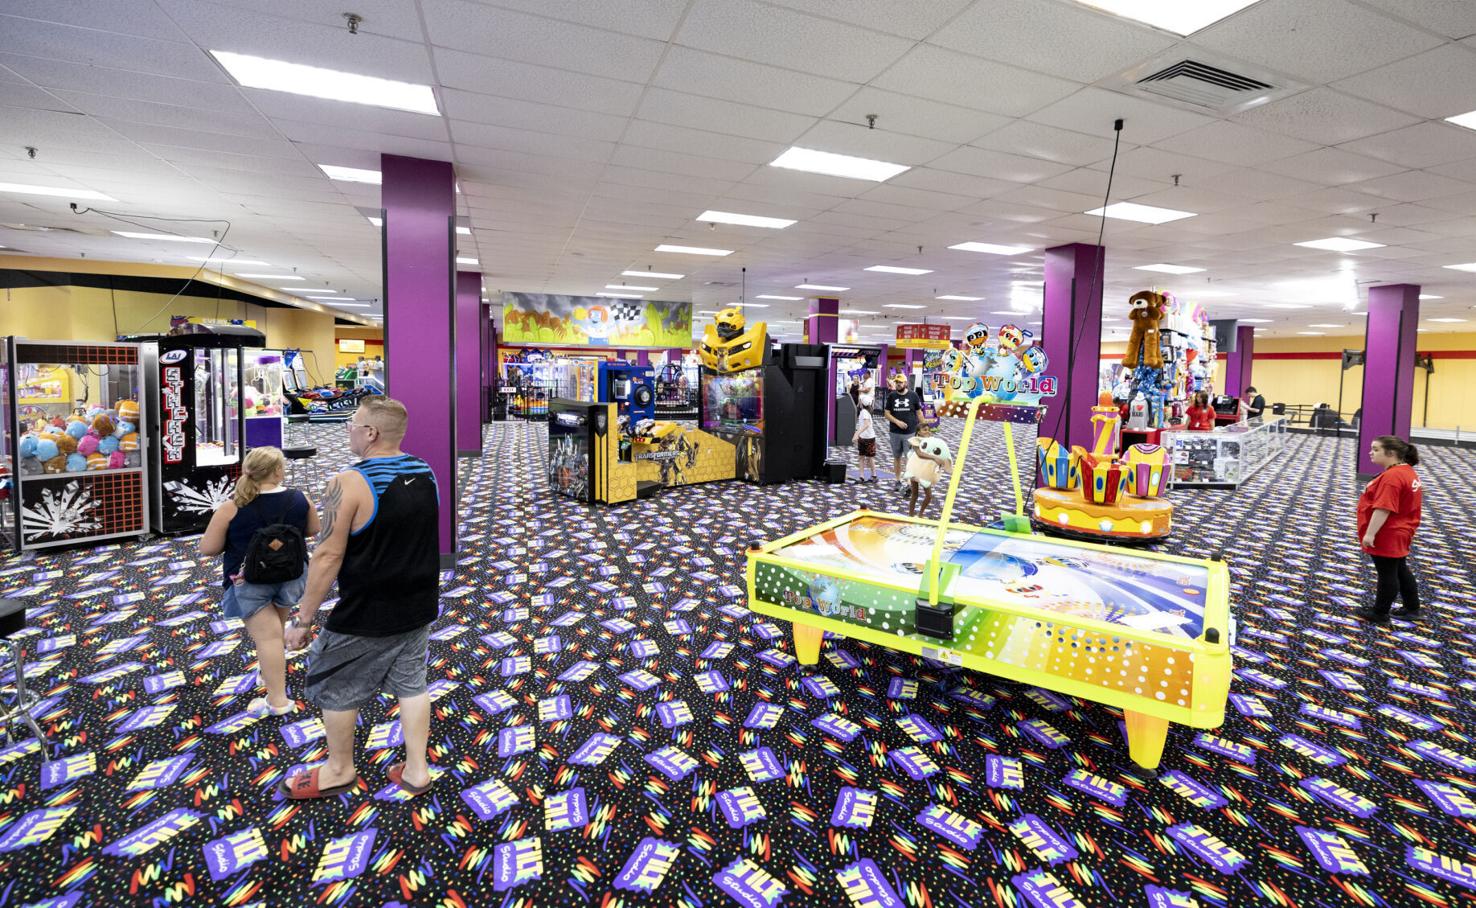 PHOTOS: Tilt Studio arcade now open in Sioux City's Southern Hills Mall